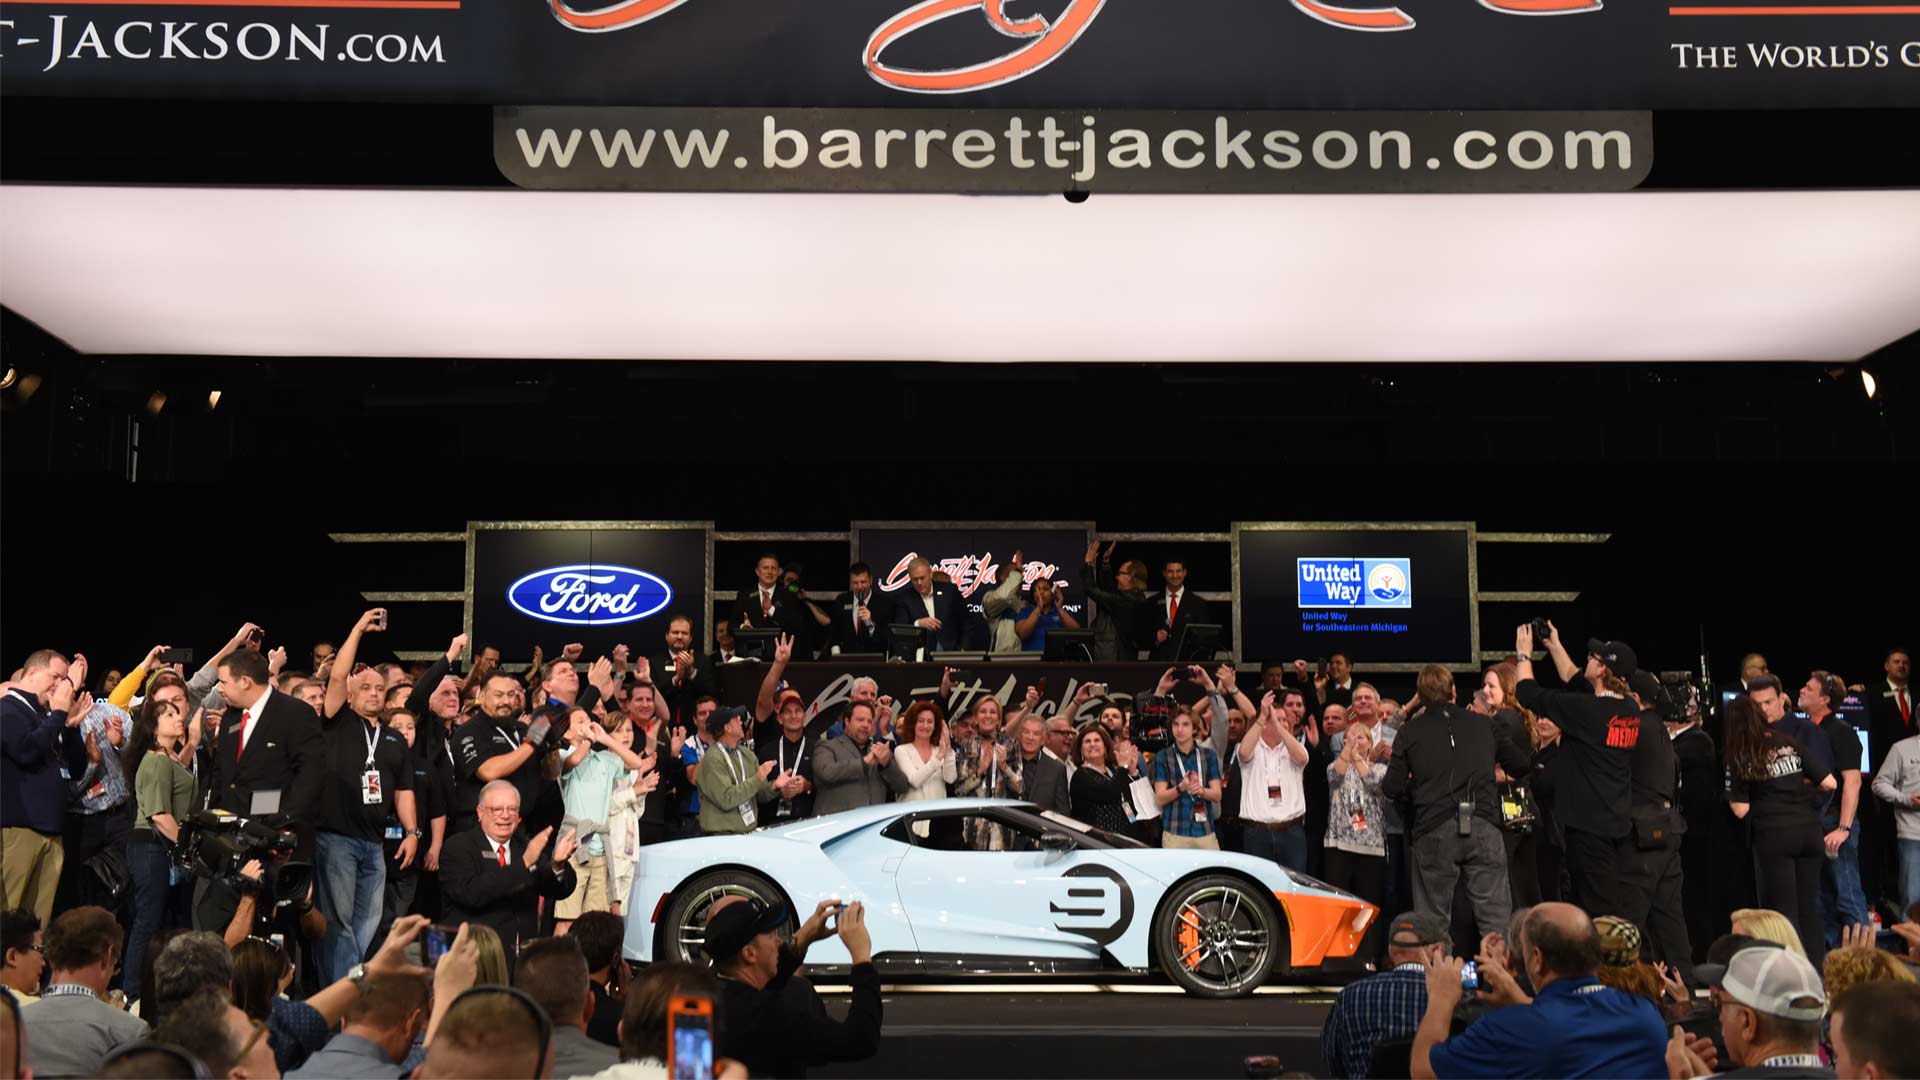 2019-Ford-GT-heritage-edition-Gulf-livery-Barrett-Jackson-auction_2